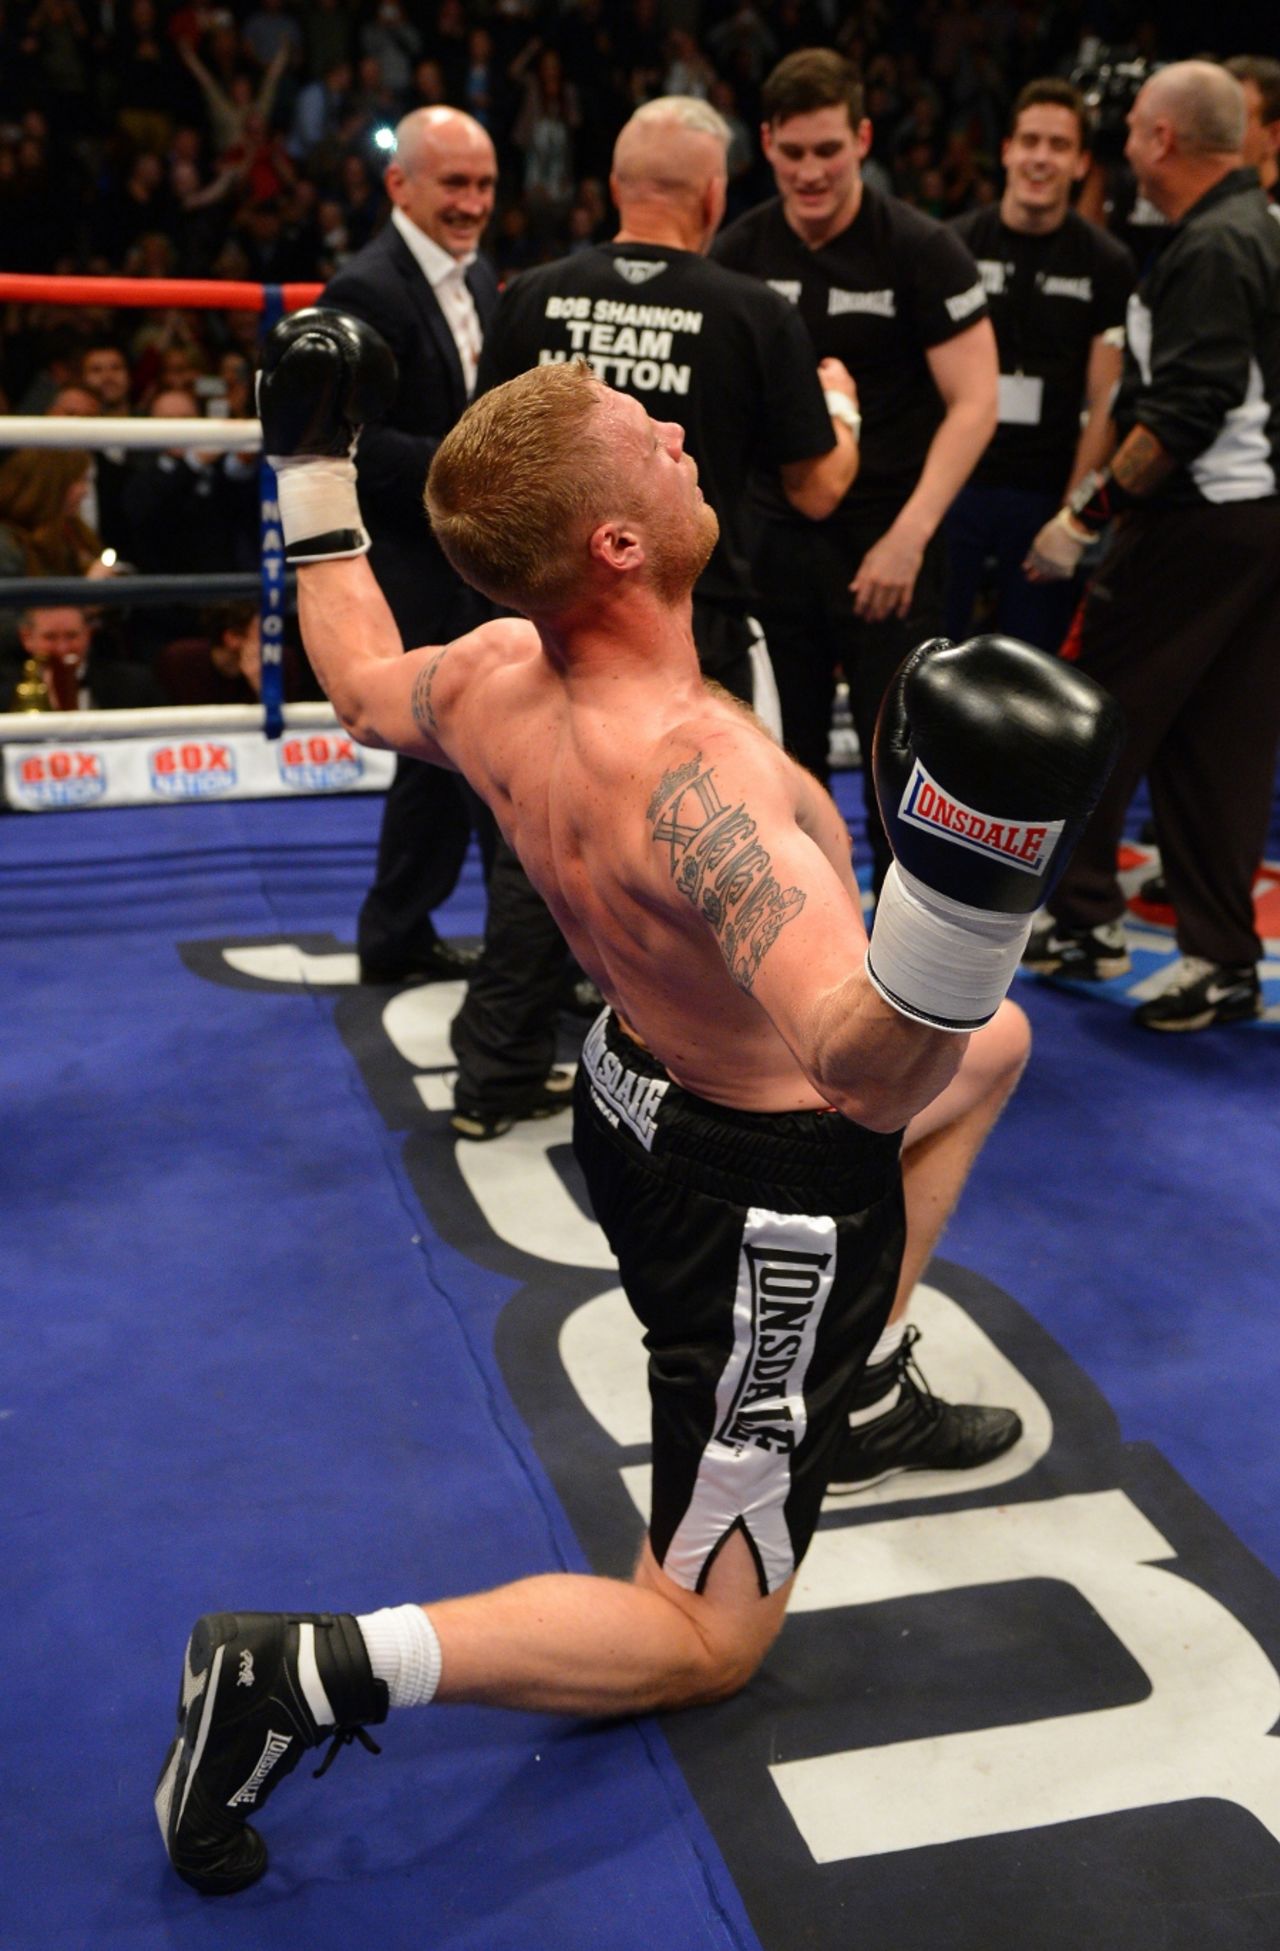 Andrew Flintoff after his fight, Manchester, November 30, 2012